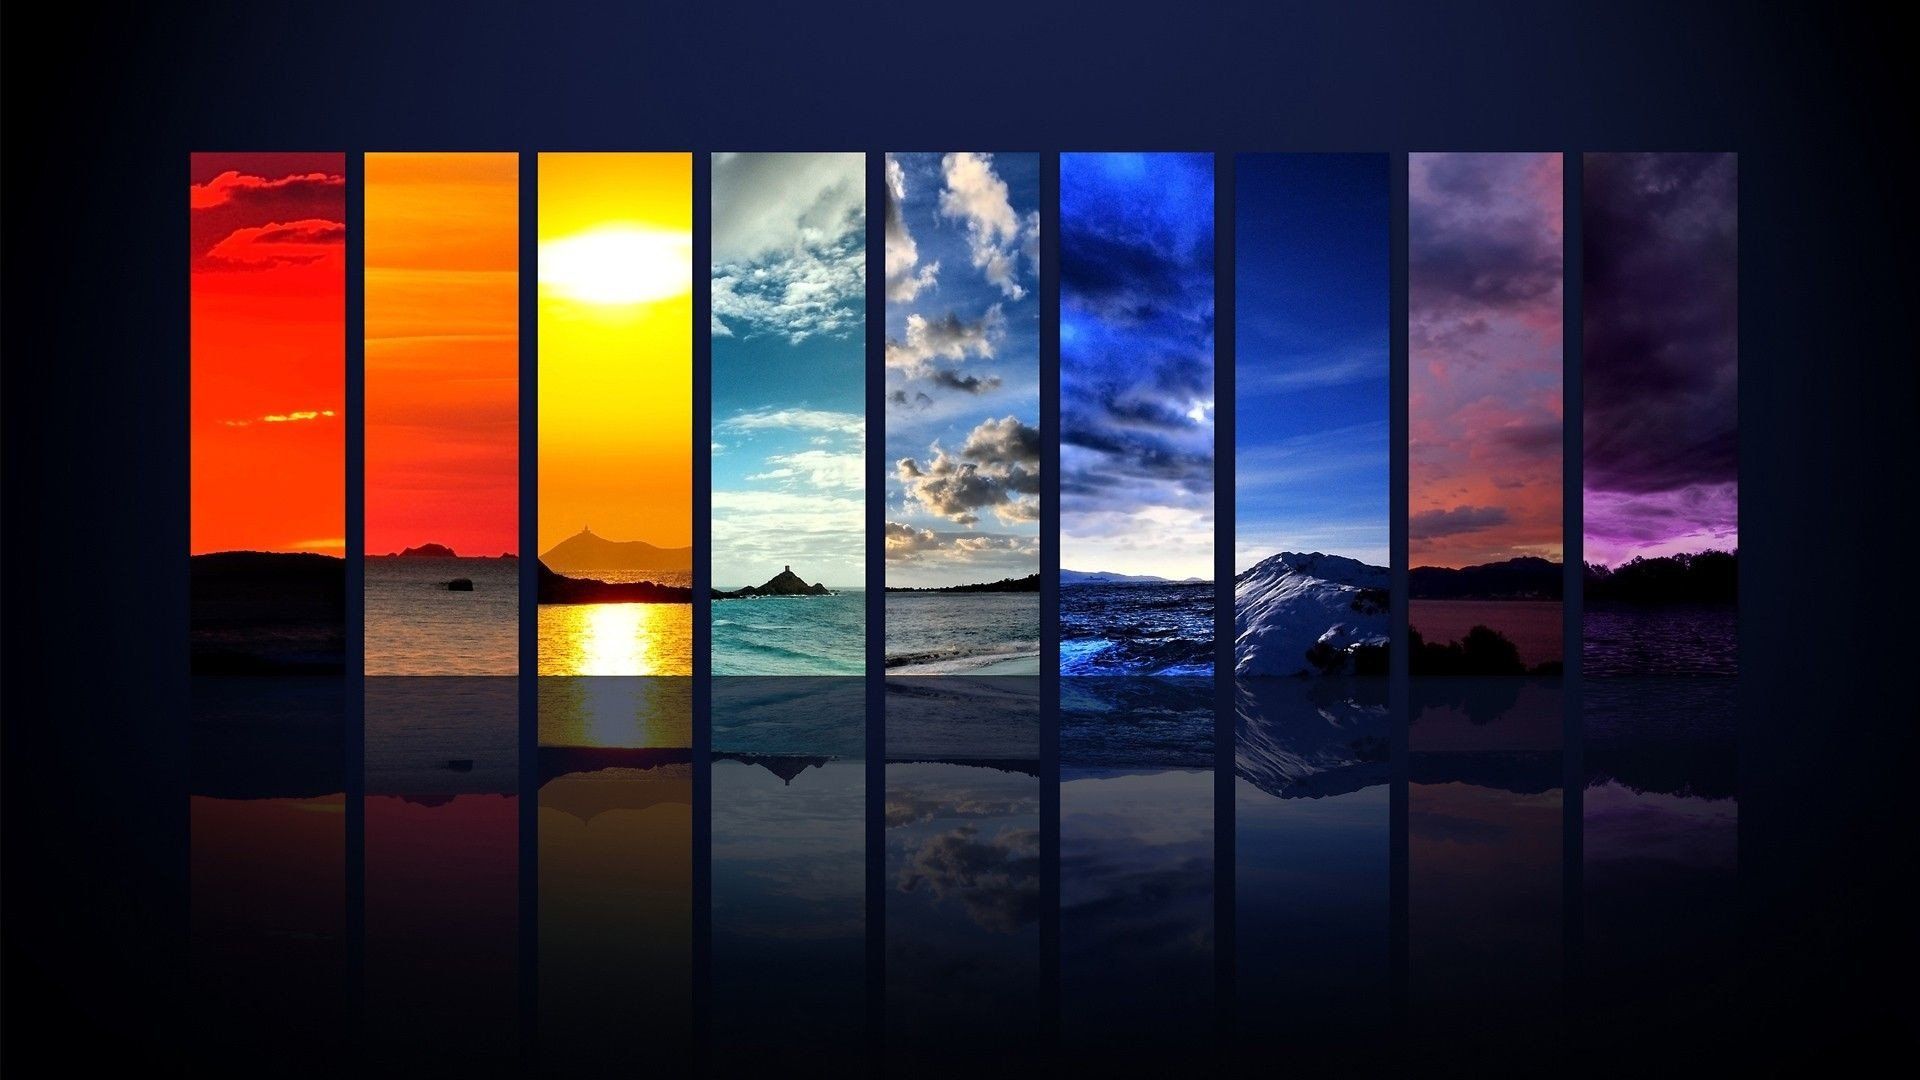 101 Awesome Wallpapers To Download For Your Desktop